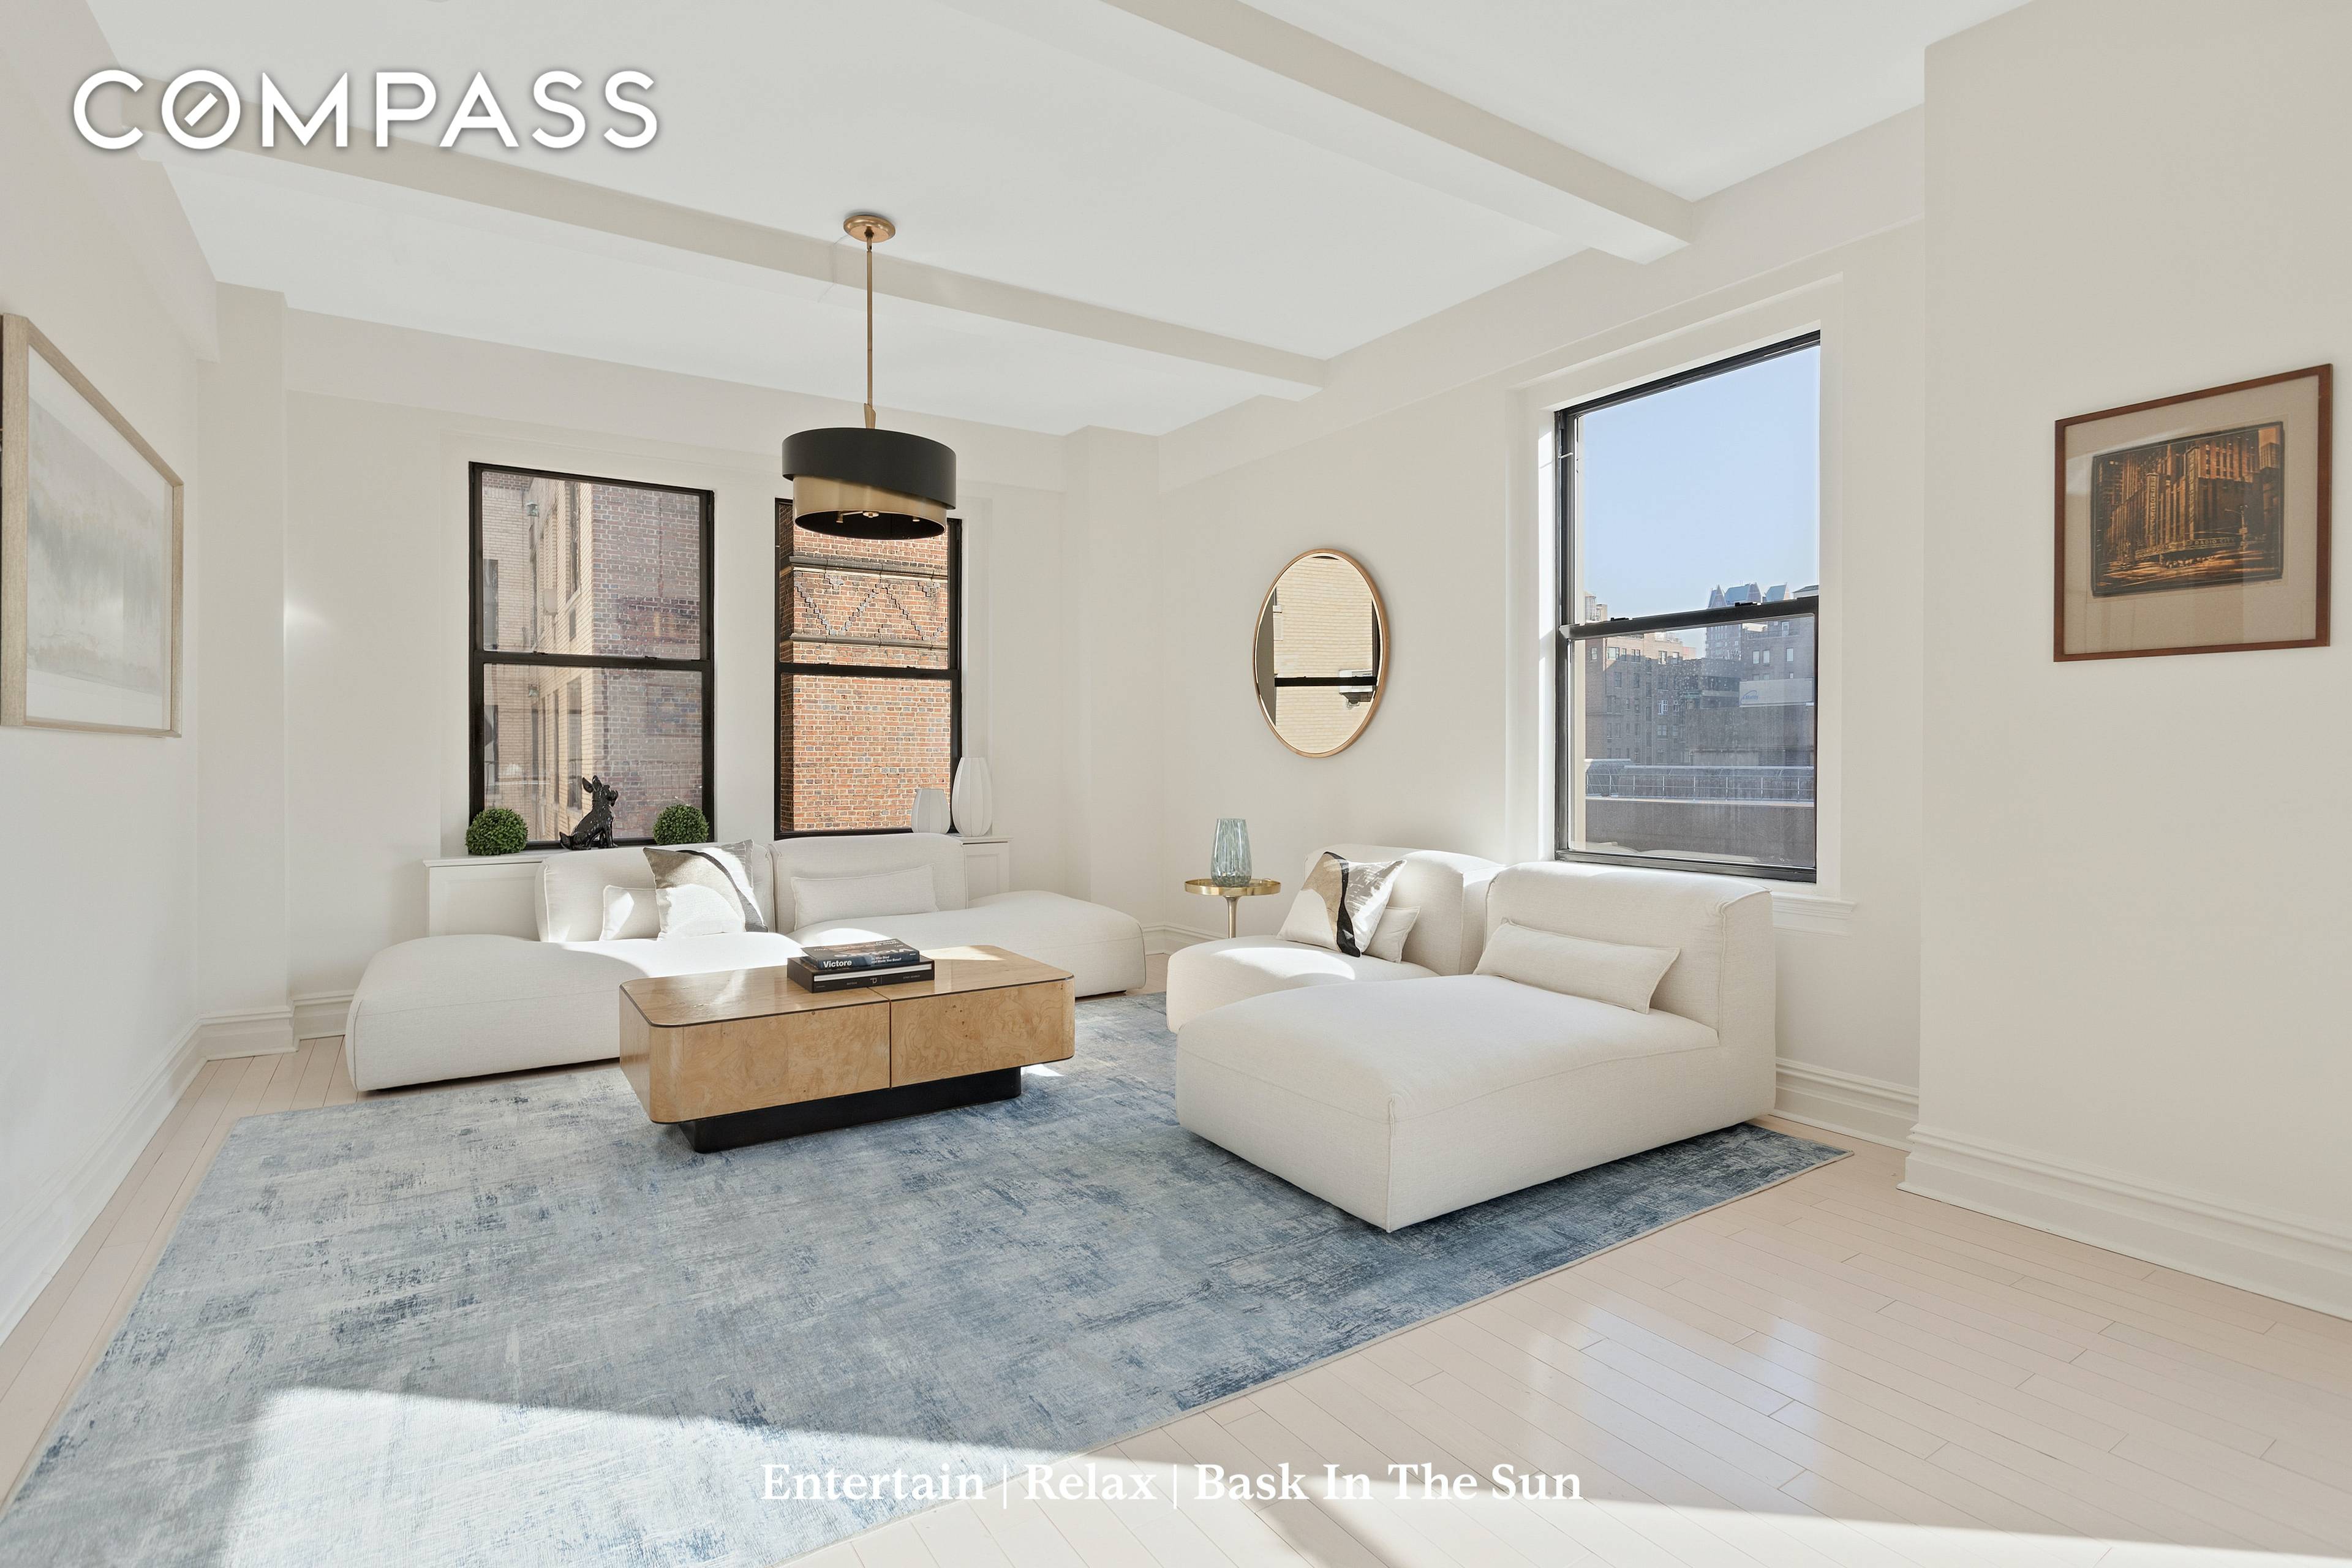 Located on a beautiful Central Park block on the Upper Eastside, this 3 bedroom, 3.